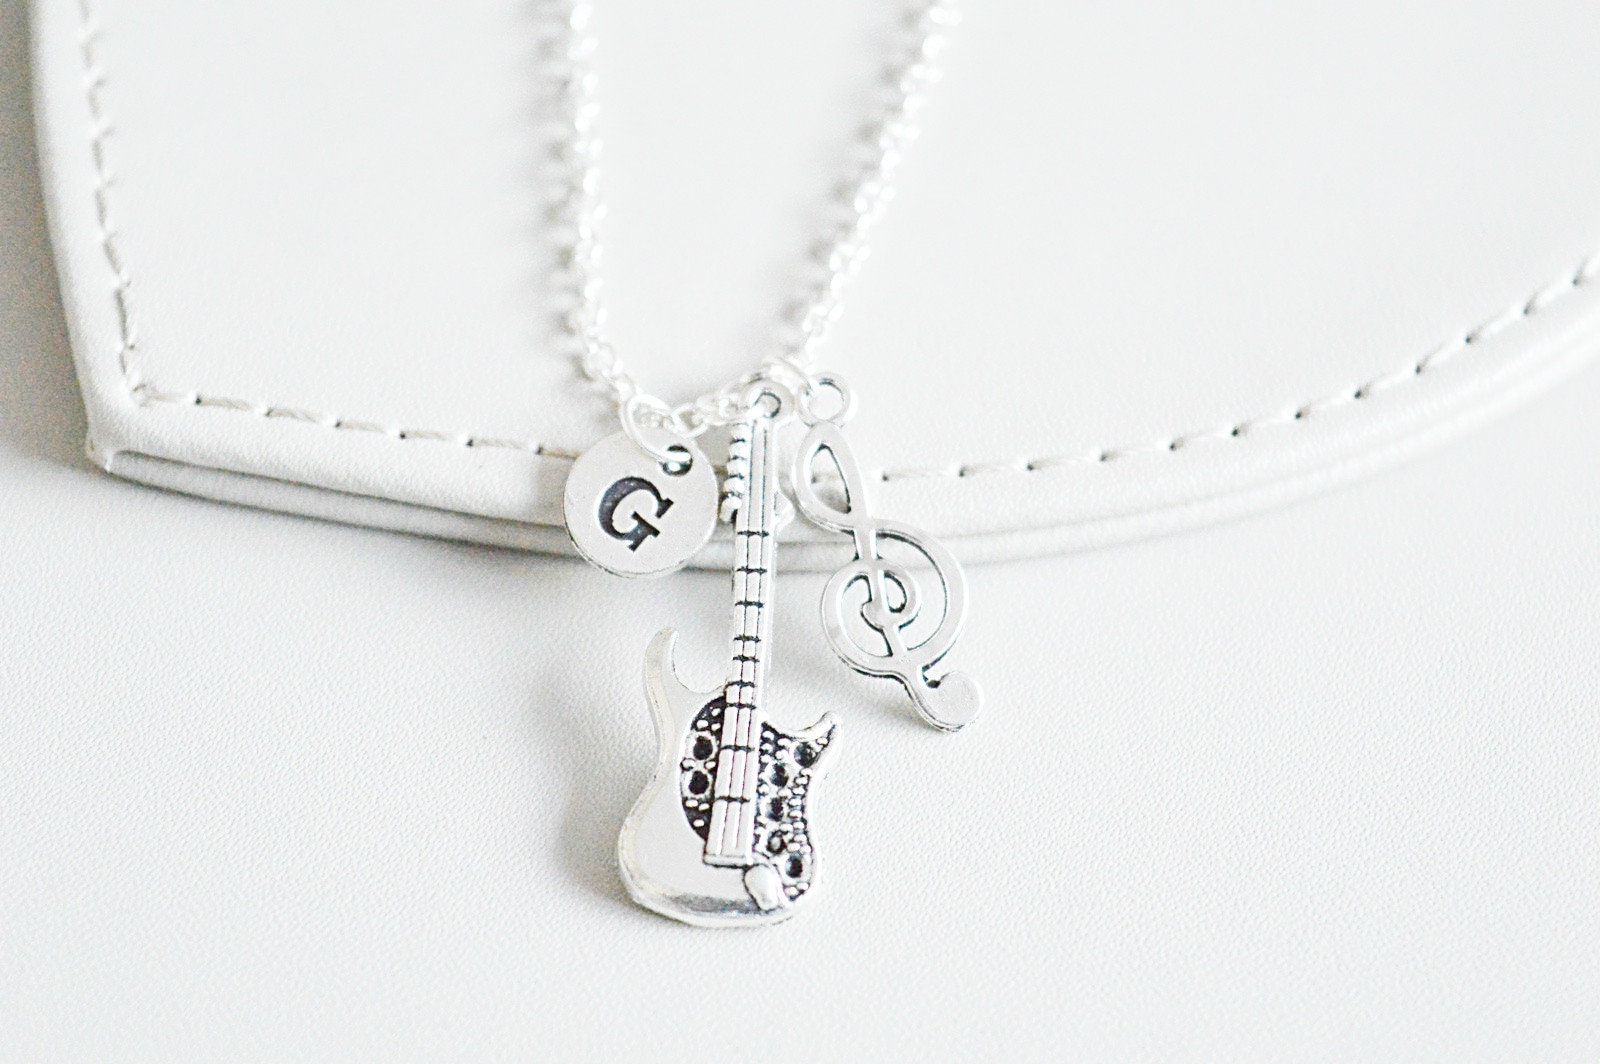 Guitar Gifts, Guitar Necklace, Guitar Jewelry, Gifts for Musicians, Musician Gift, Music Lover Gift, Music Jewelry, Guitars, Music Note